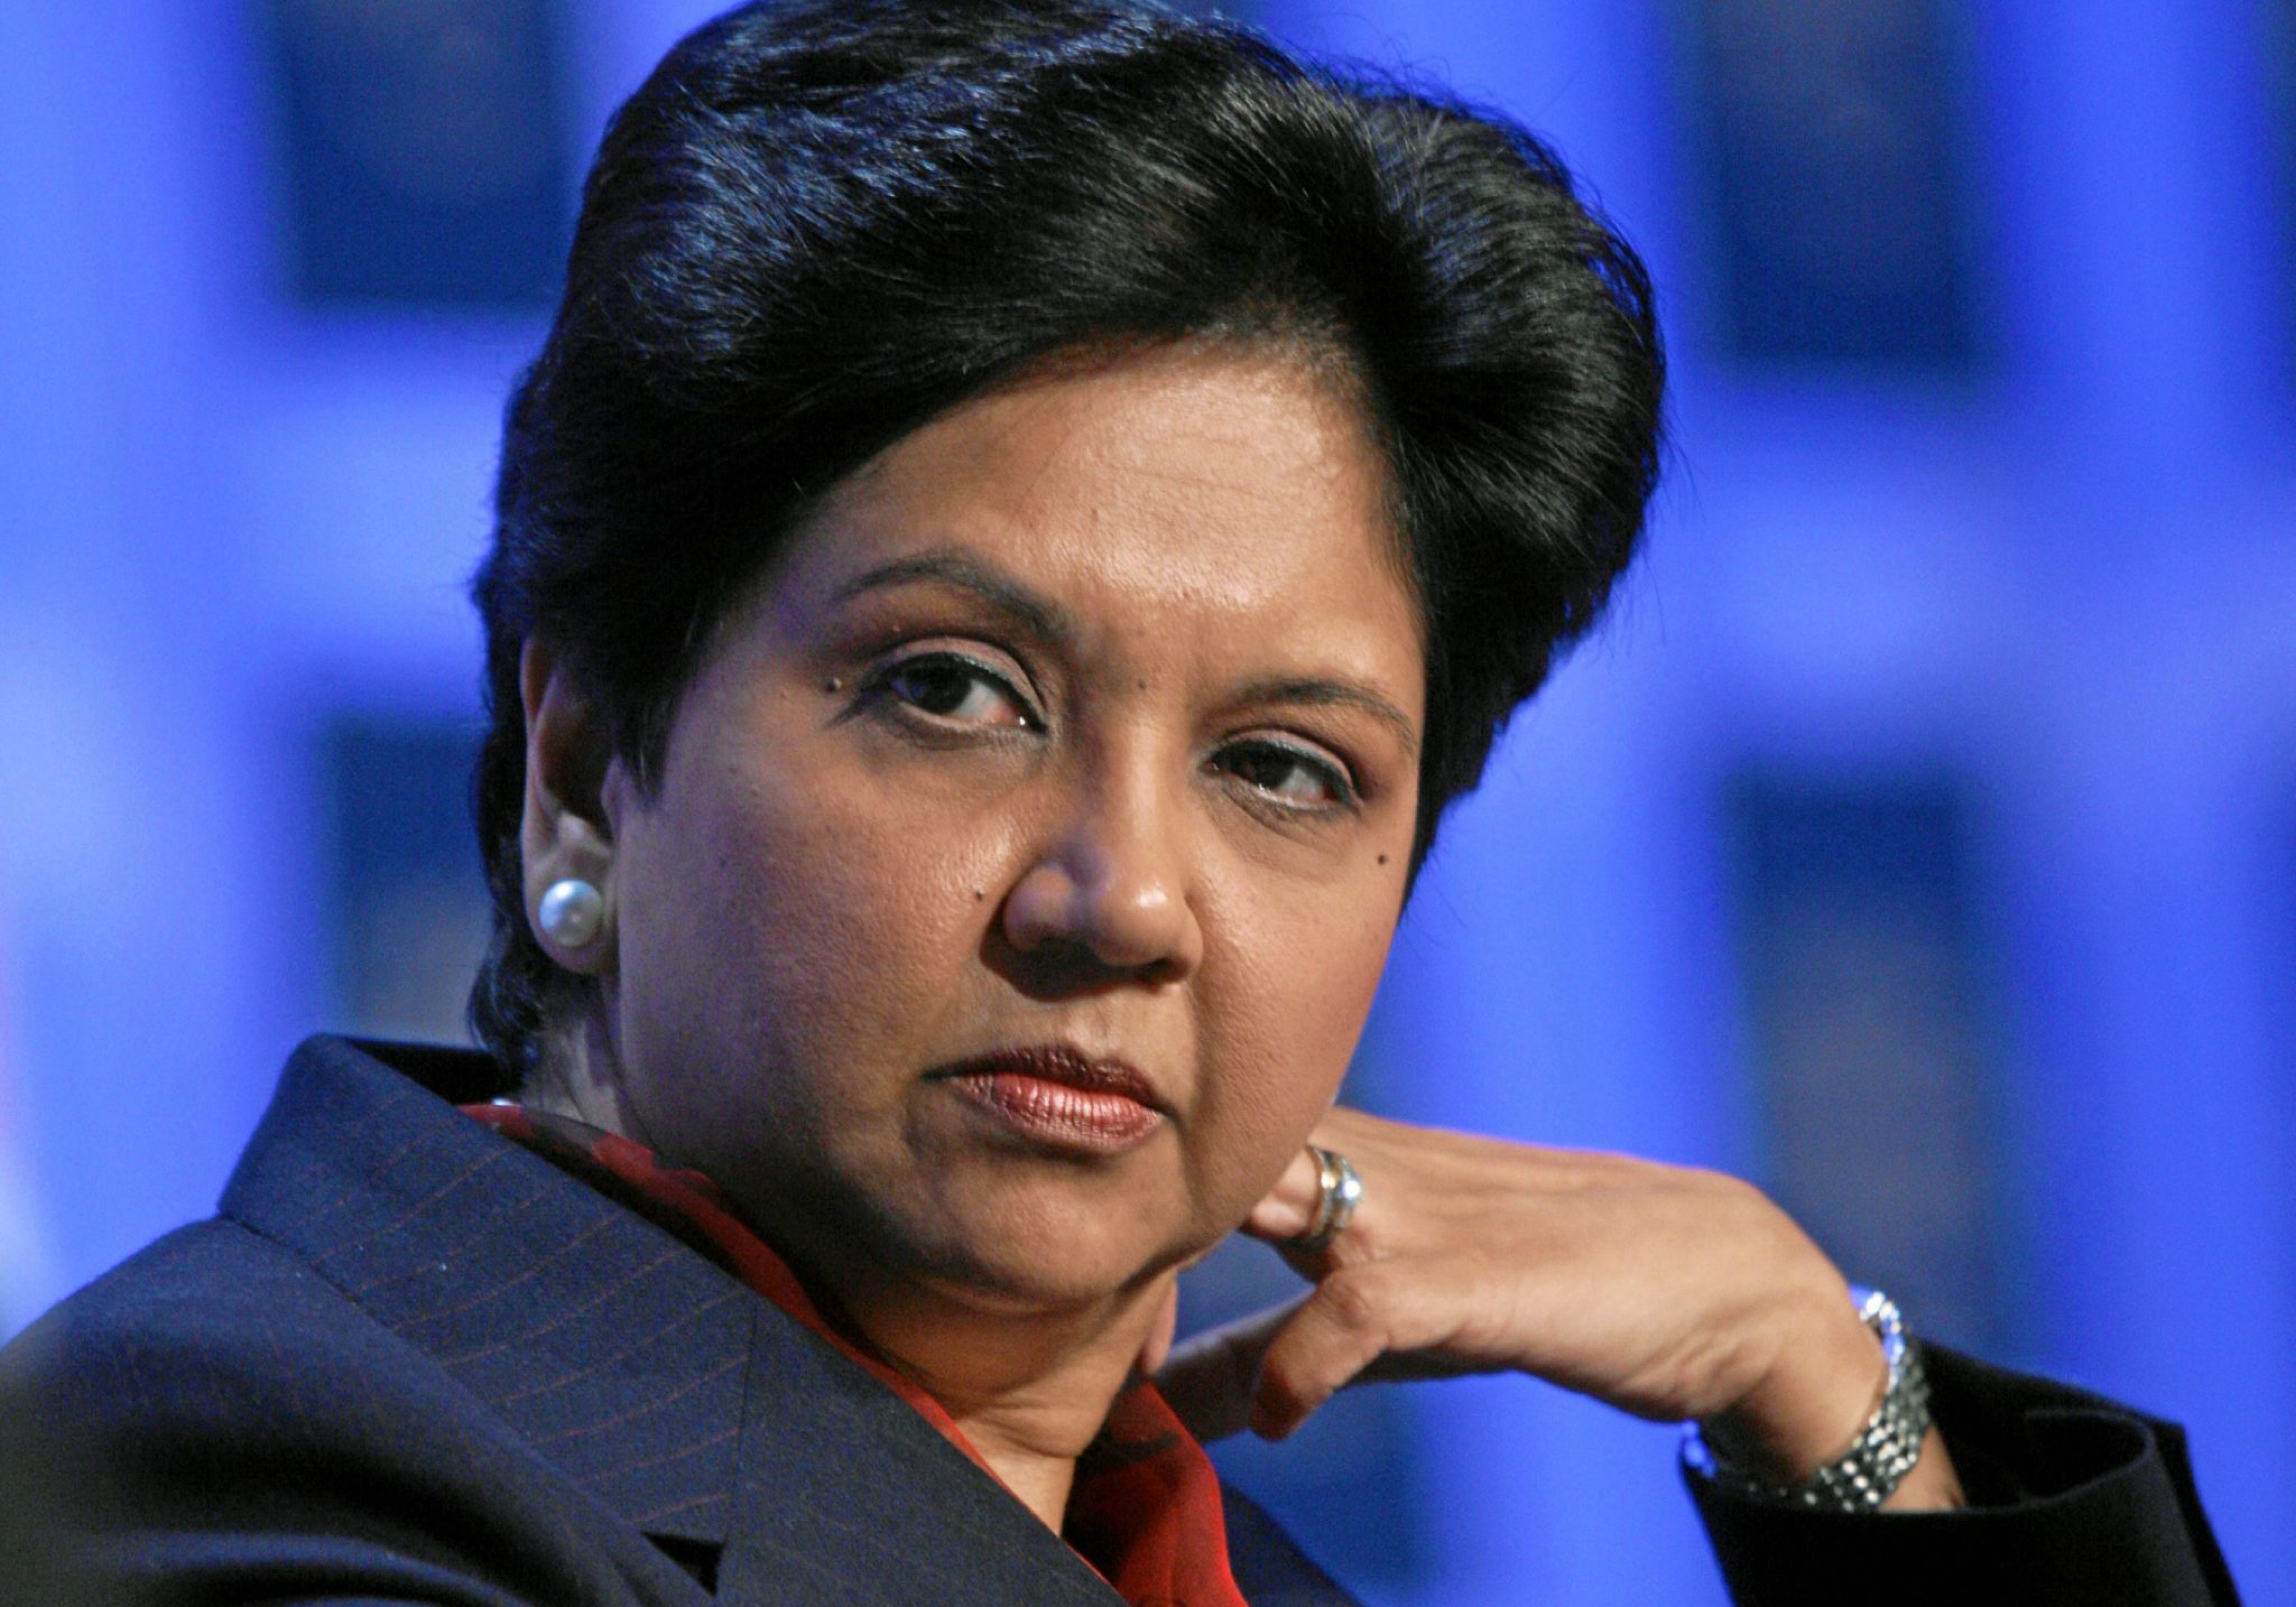 DAVOS/SWITZERLAND, 25JAN08 - Indra K. Nooyi, Chairman and Chief Executive Officer, PepsiCo, USA; Co-Chair of the World Economic Forum Annual Meeting 2008, captured during the session 'Corporate Global Citizenship in the 21st Century' at the Annual Meeting 2008 of the World Economic Forum in Davos, Switzerland, January 25, 2008.

Copyright by World Economic Forum    swiss-image.ch/Photo by Andy Mettler

+++No resale, no archive+++